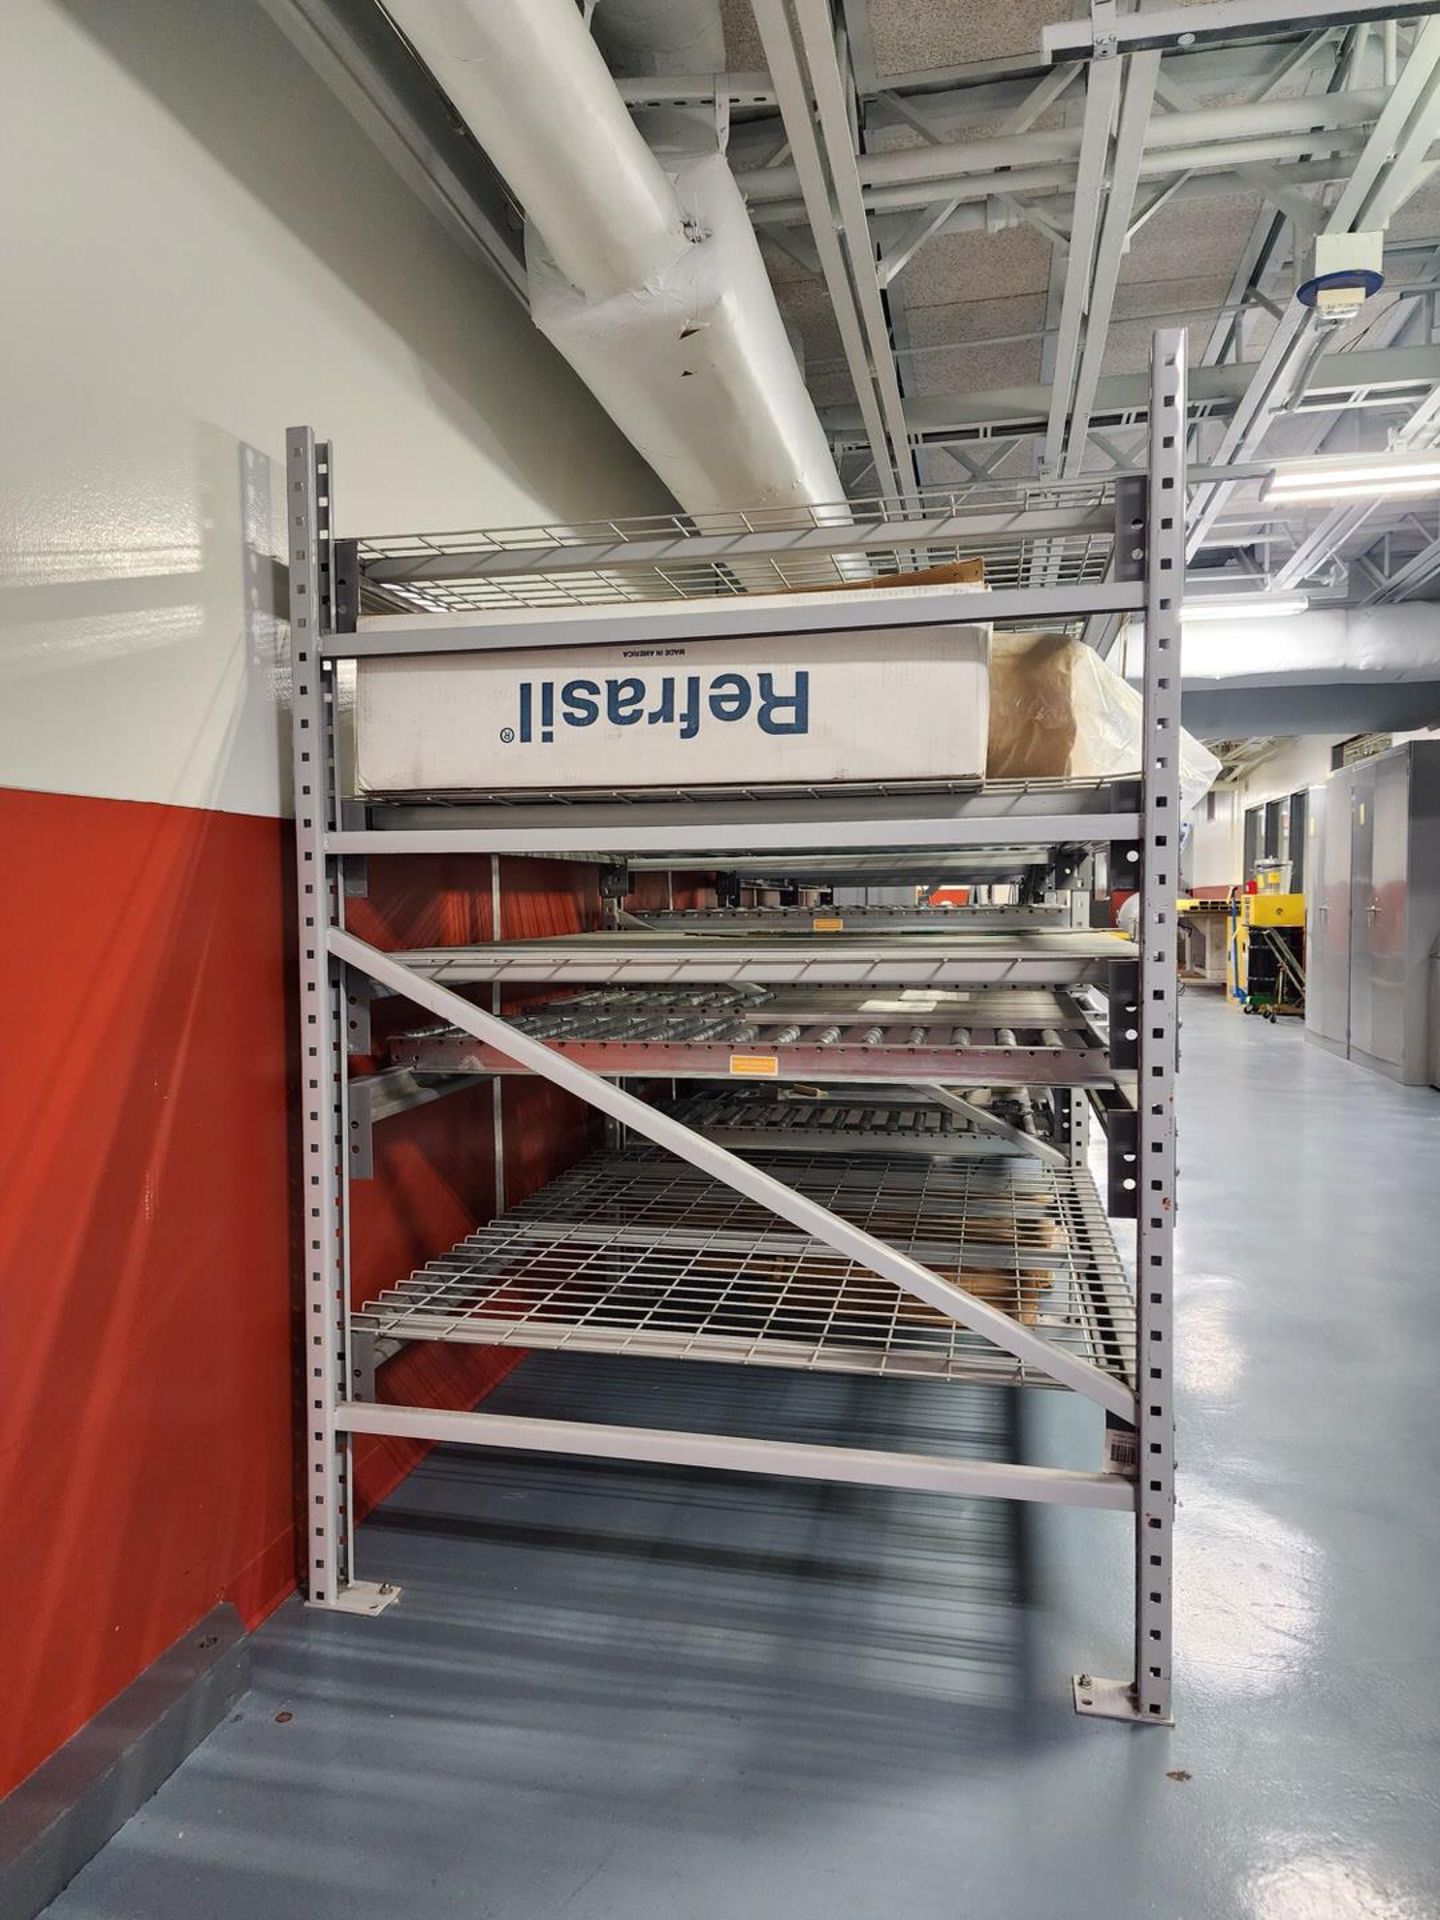 Roller Conveyer Material Rack Unit 252" x 51" x 72"H - Image 4 of 9